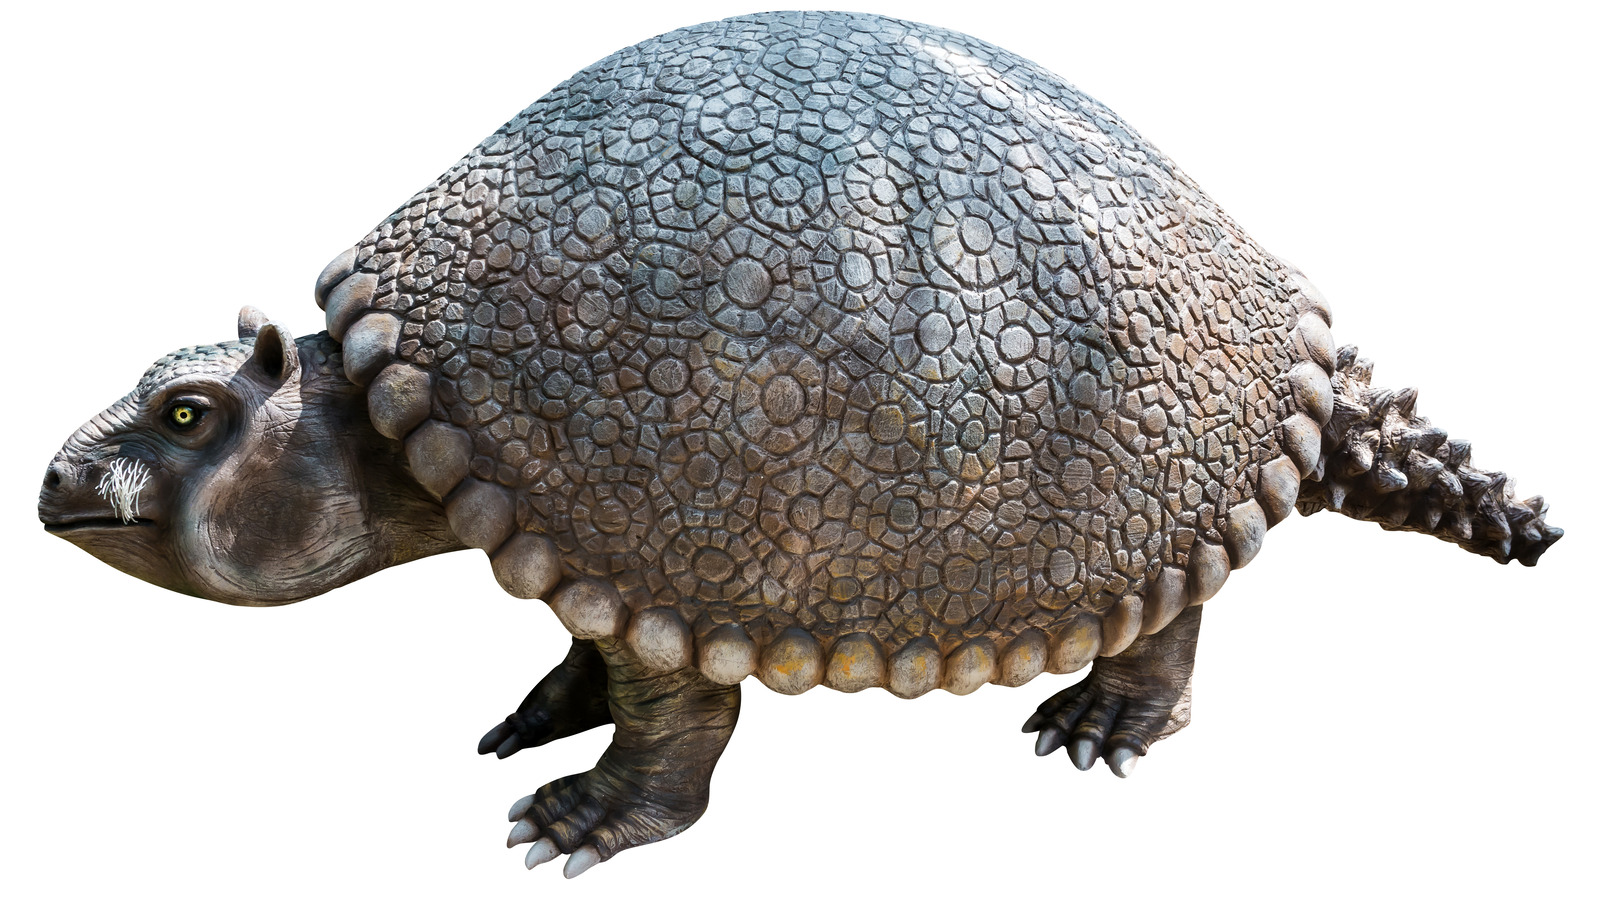  A giant armadillo-like prehistoric Glyptodon fossil isolated on a white background.